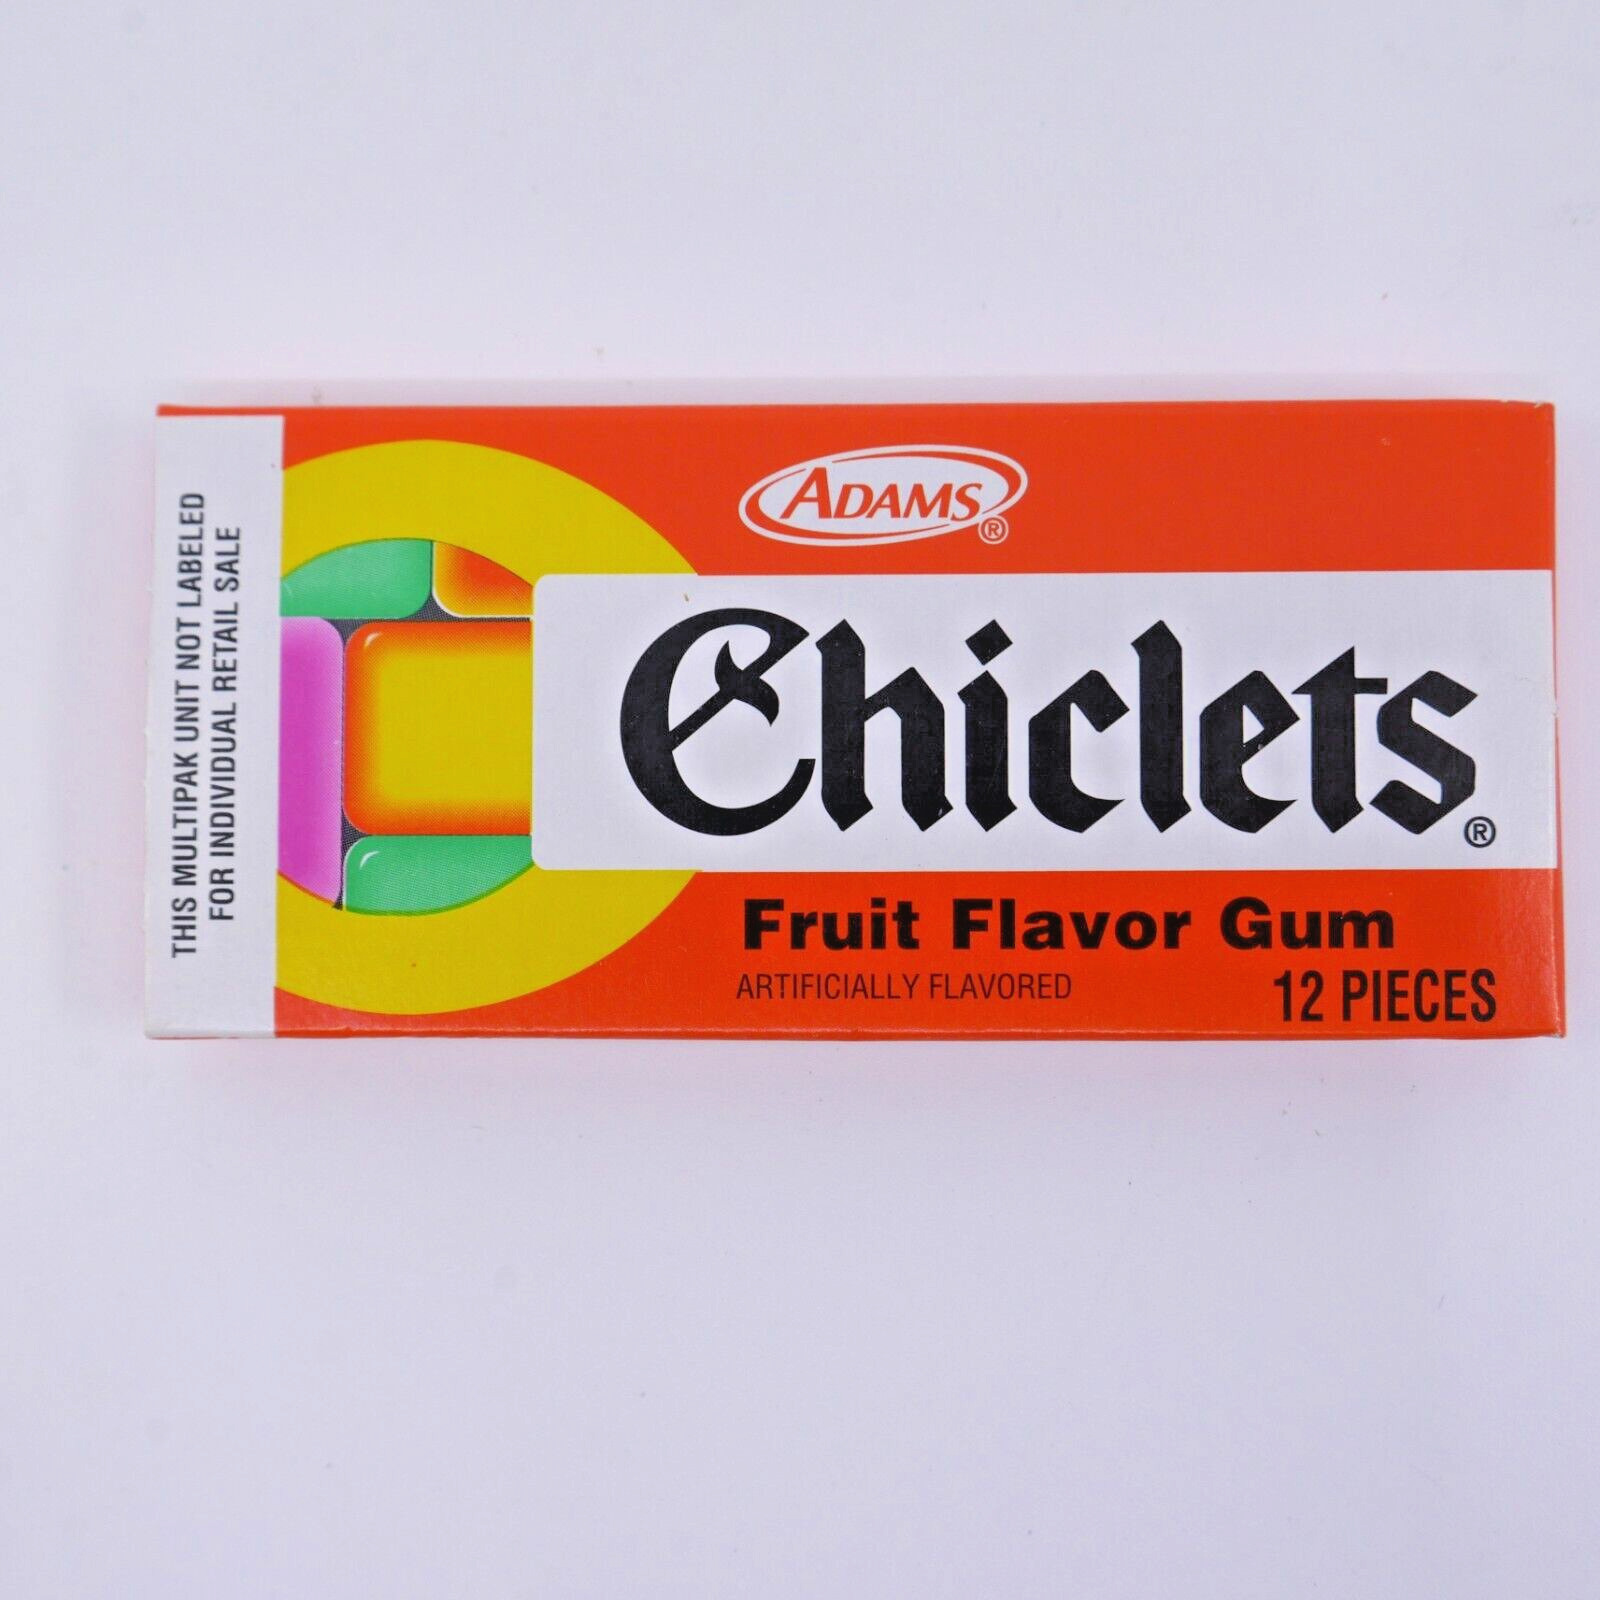 Chiclets Chewing Gum Fruit Flavored ADAMS OPENED/Unsealed pack**COLLECTIBLE**